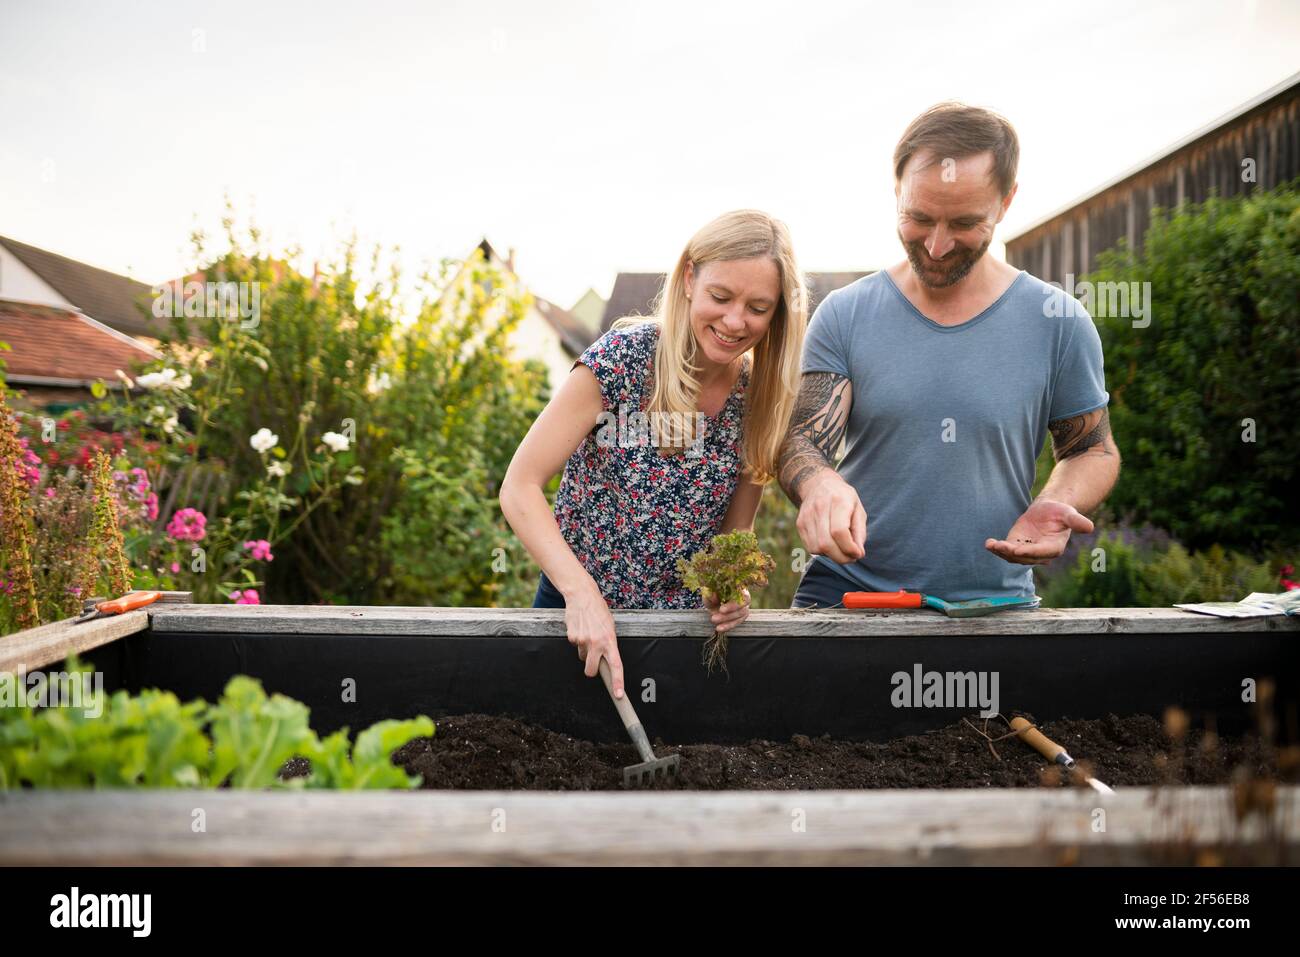 Woman sowing seed while planting in garden with boyfriend Stock Photo